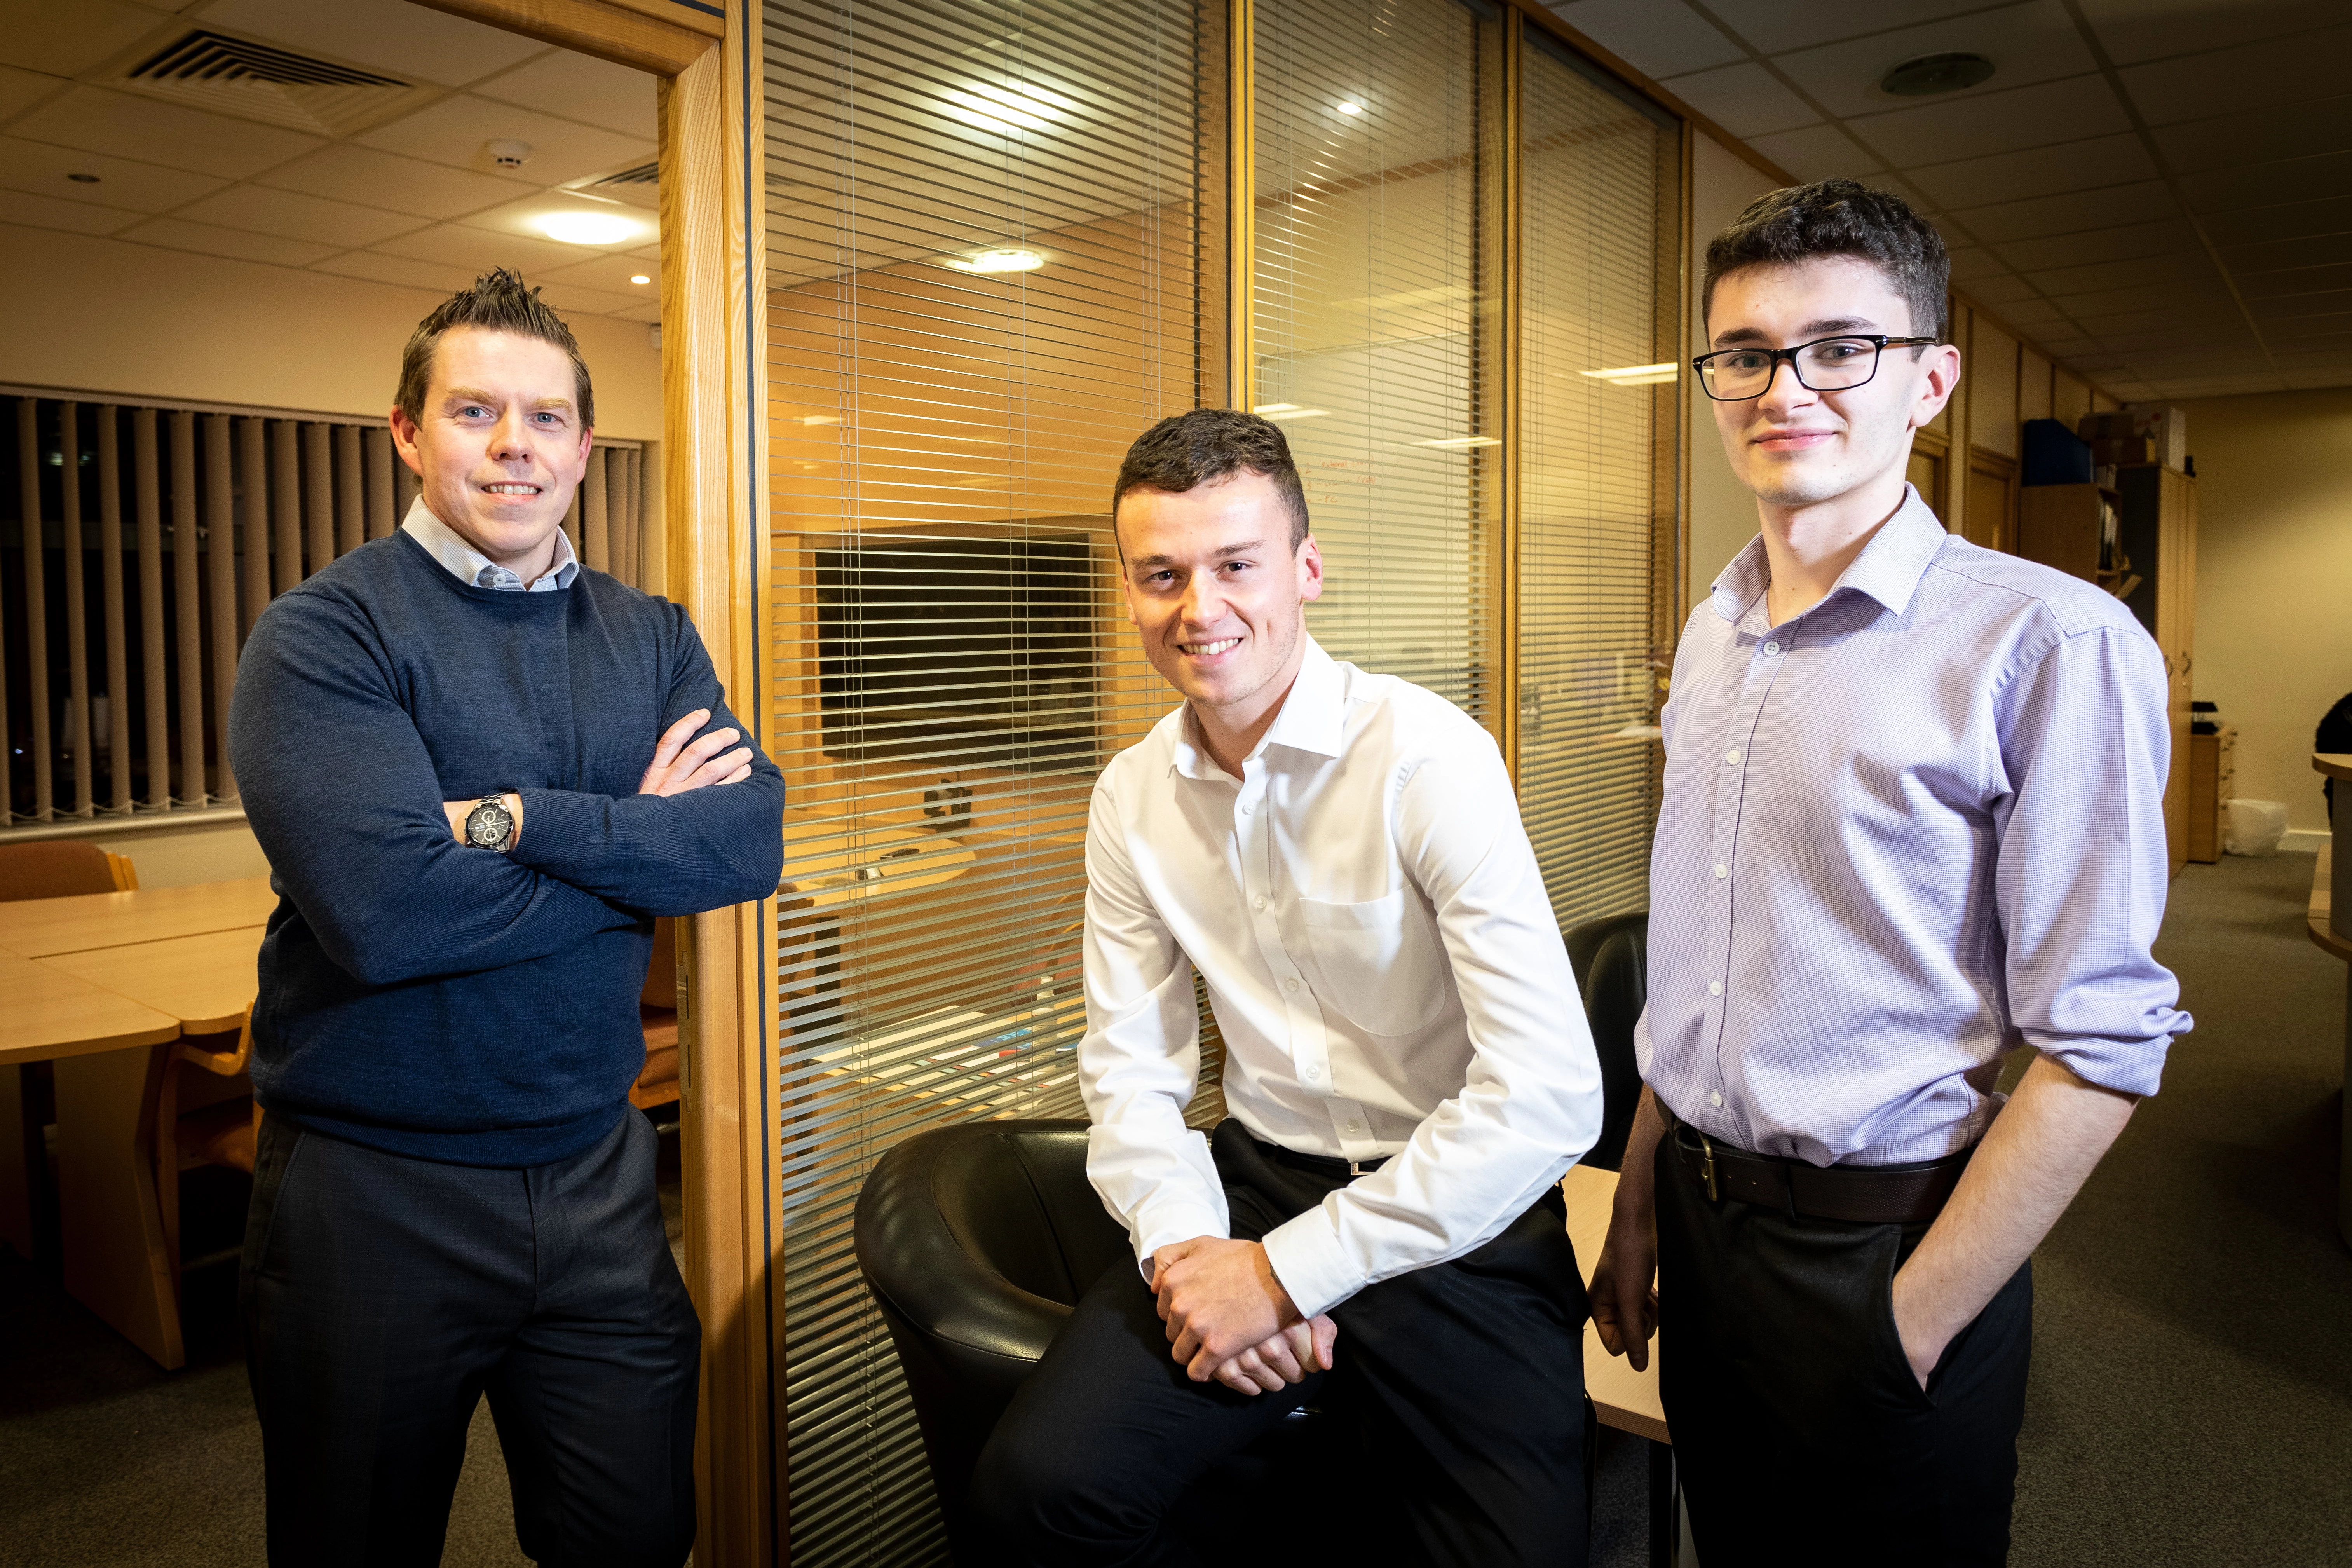 L-R: Desco Director Paul Baker with PlanBEE students Ewan Simpson and Tom Mullen